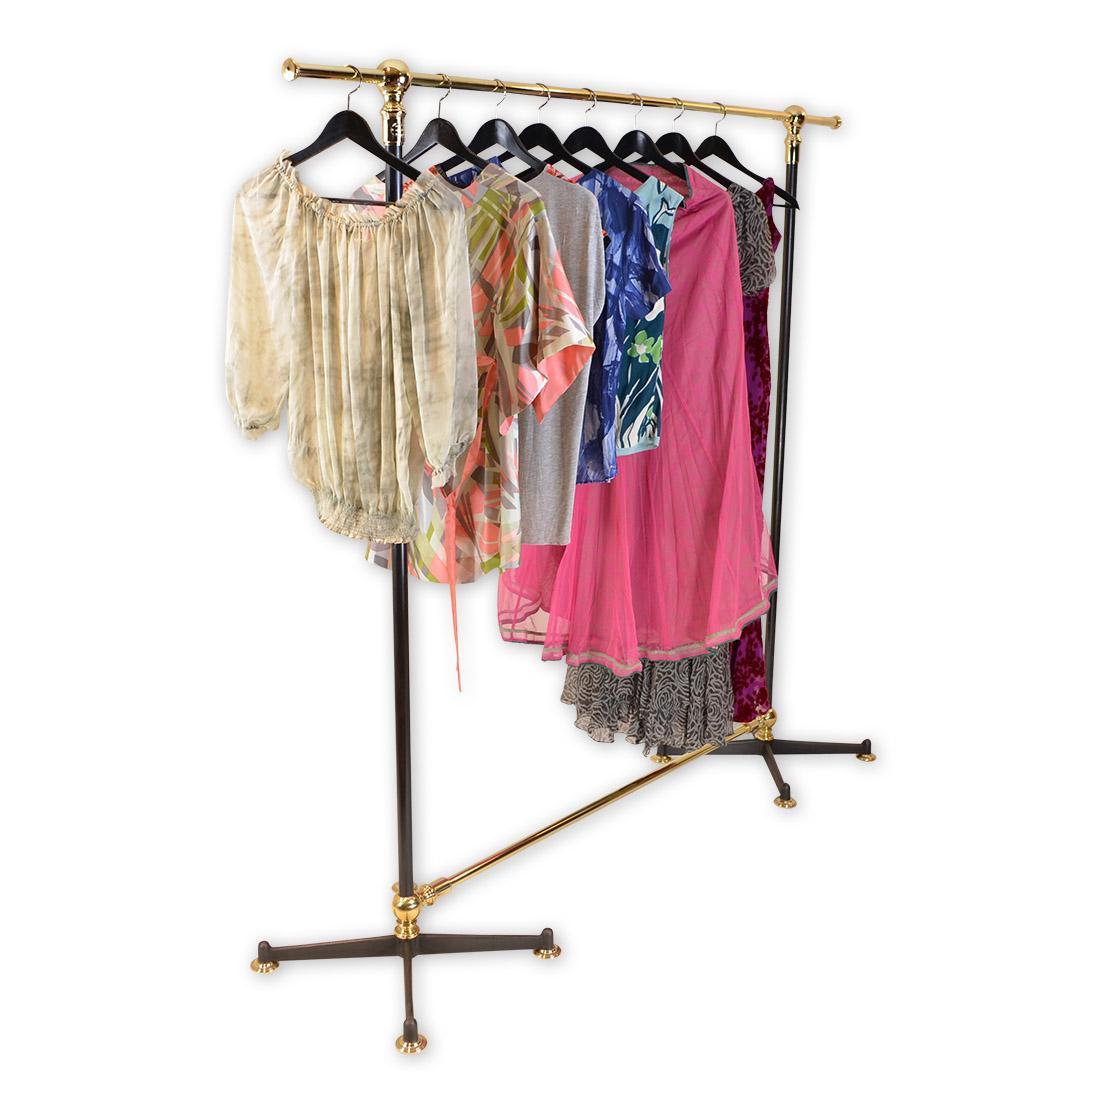 The Brighton, an Andrew Nebbett designs large clothes rail in brass, steel and cast iron base. This Brighton clothes rail is tailor-made to order and is handmade, coloured, patinated and finished in our English workshops from the finest quality